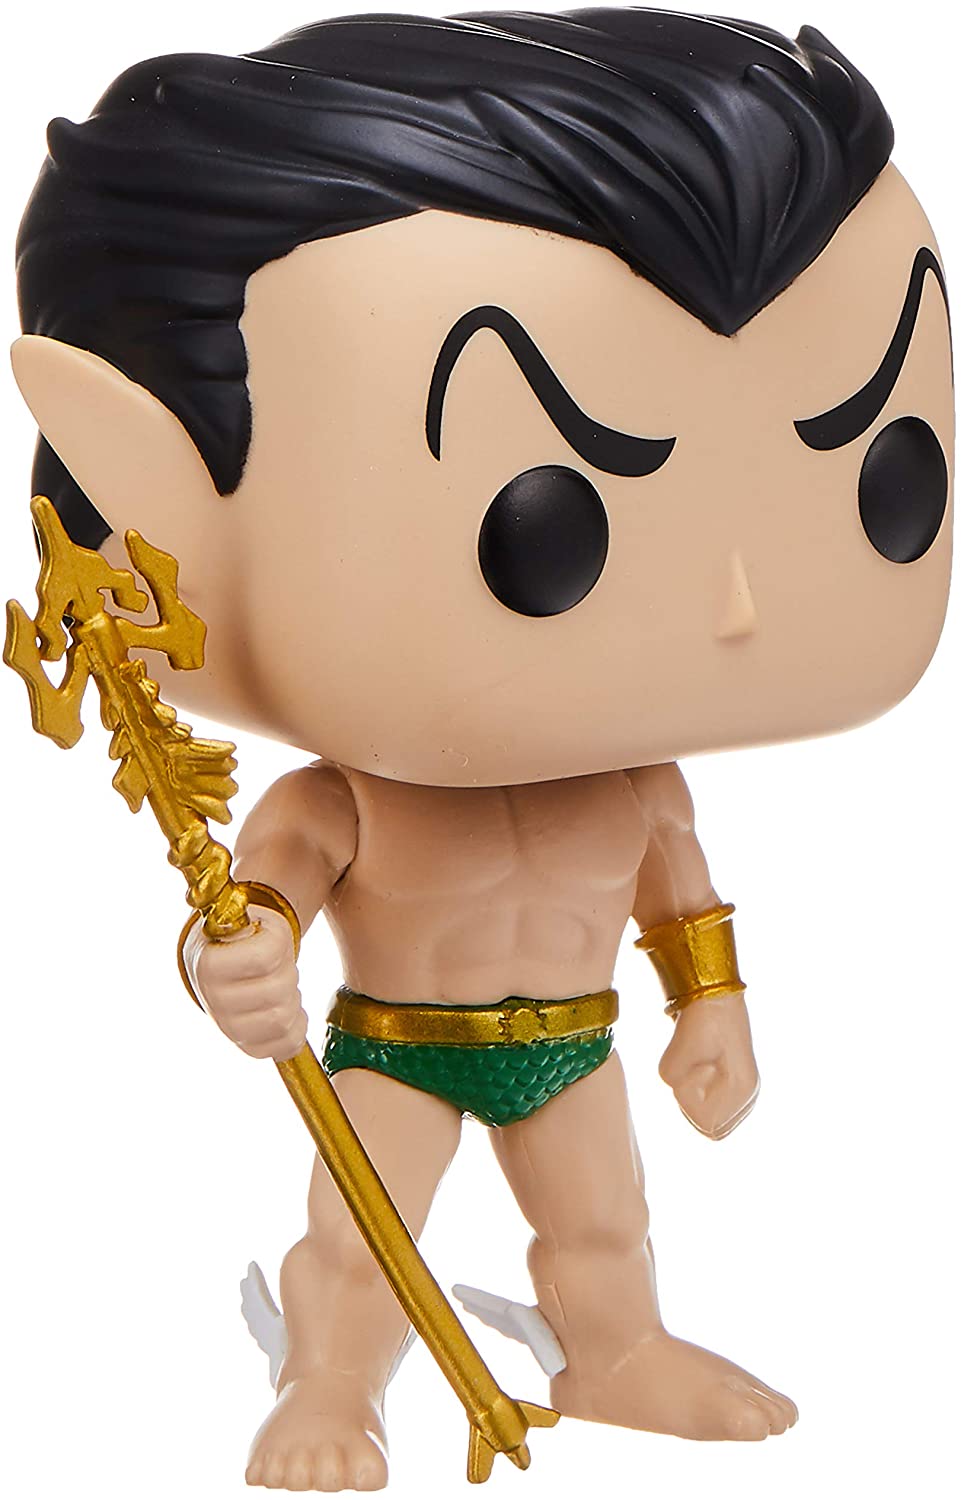 Funko POP! Marvel 80th: First Appearance - Namor